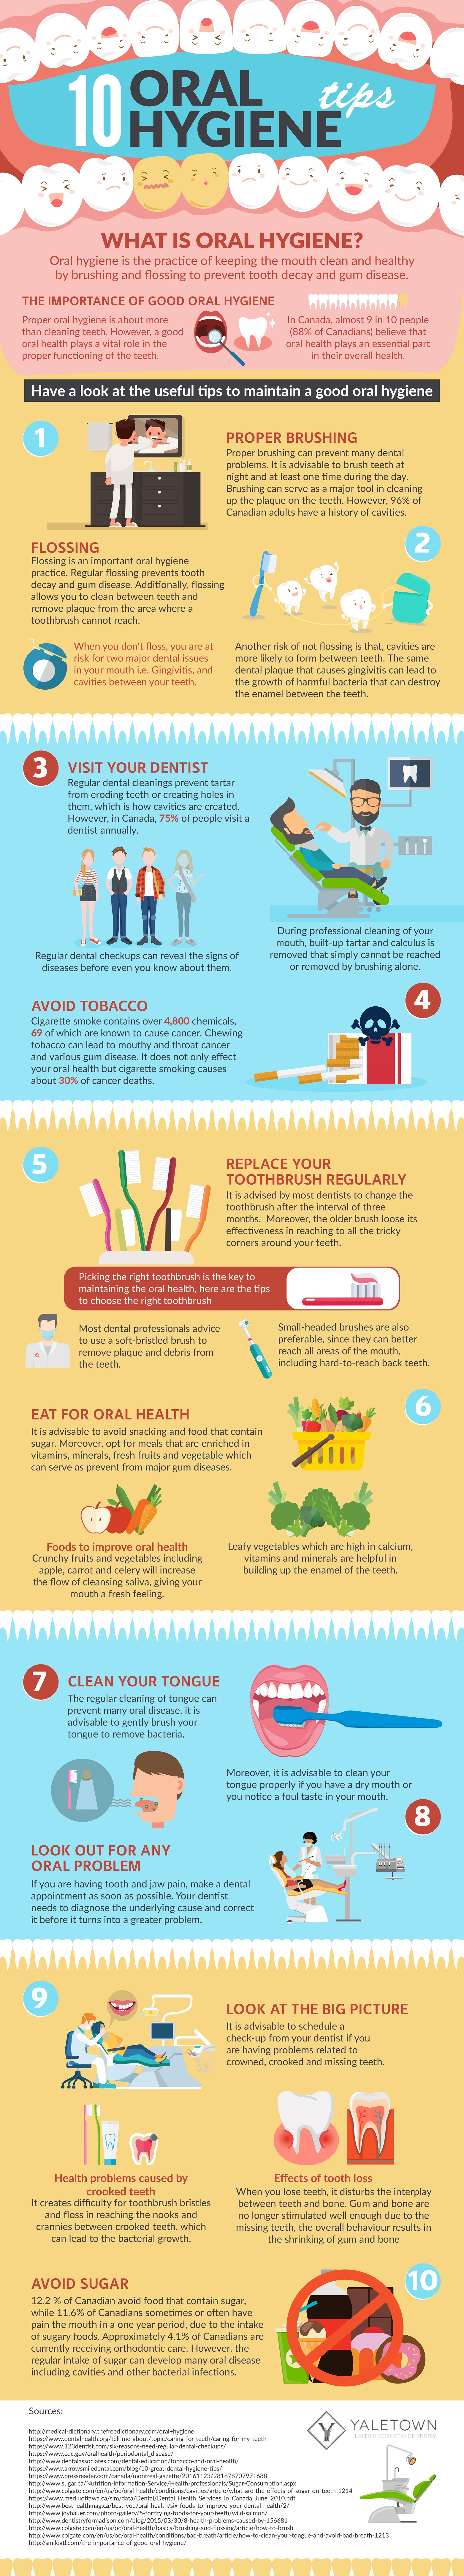 Life Hacks - Maintaining Oral Hygiene - Infographic